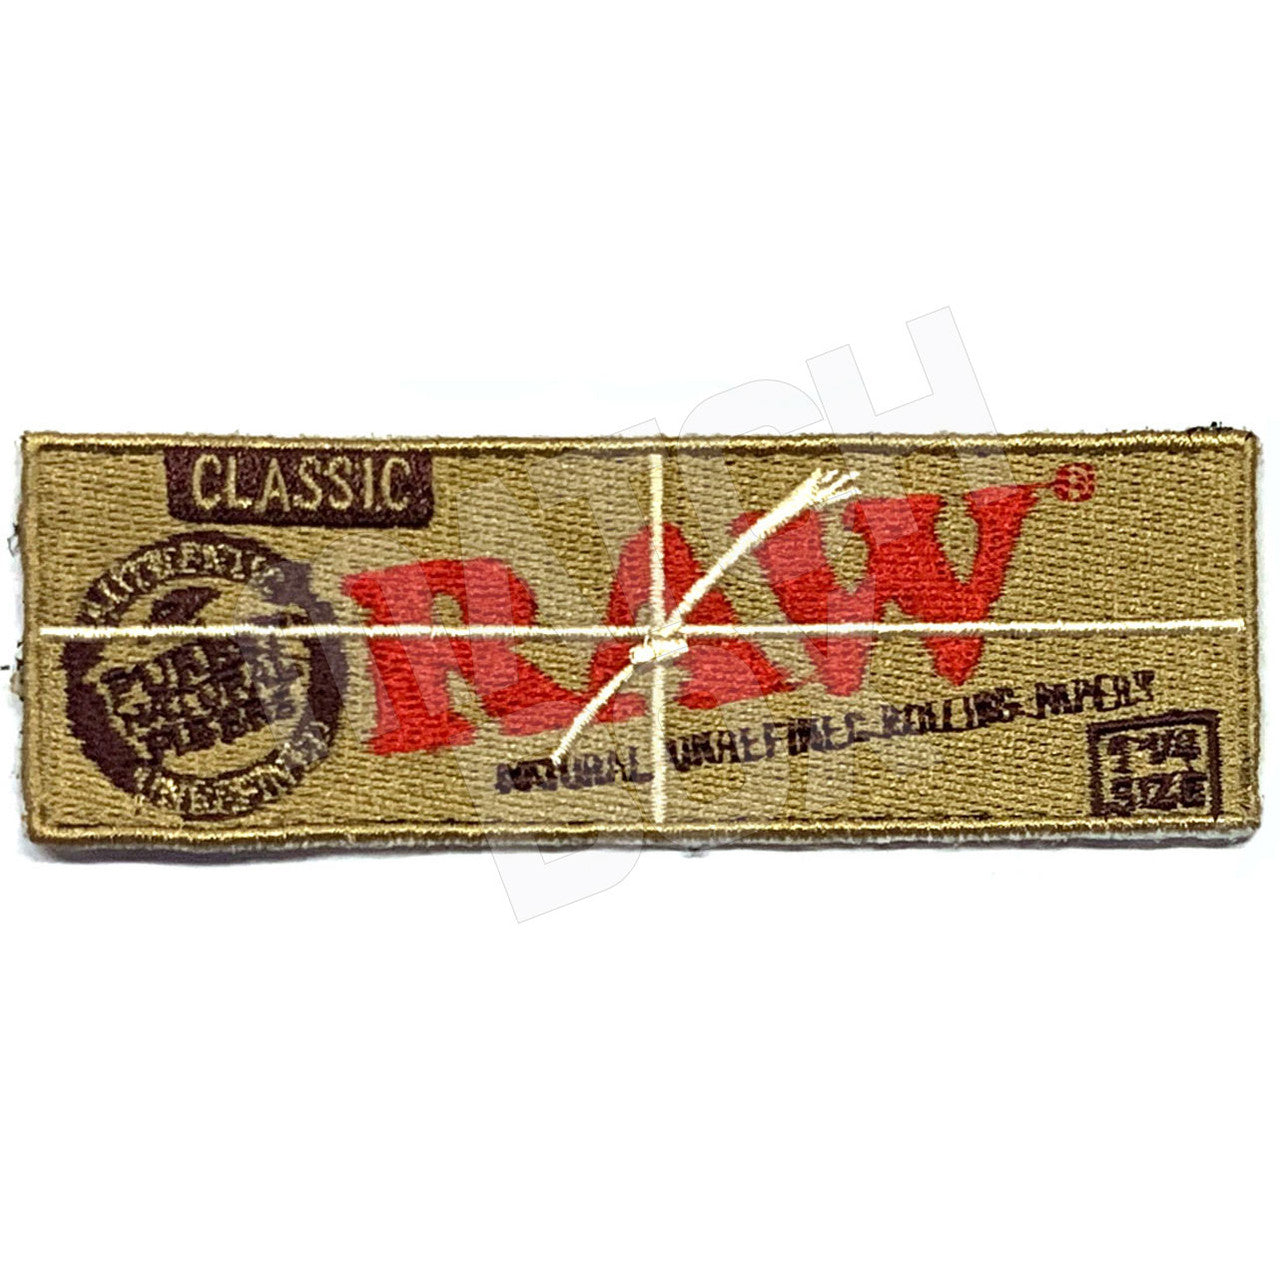 RAW Smokers Patch Collection - Classic Rolling Paper